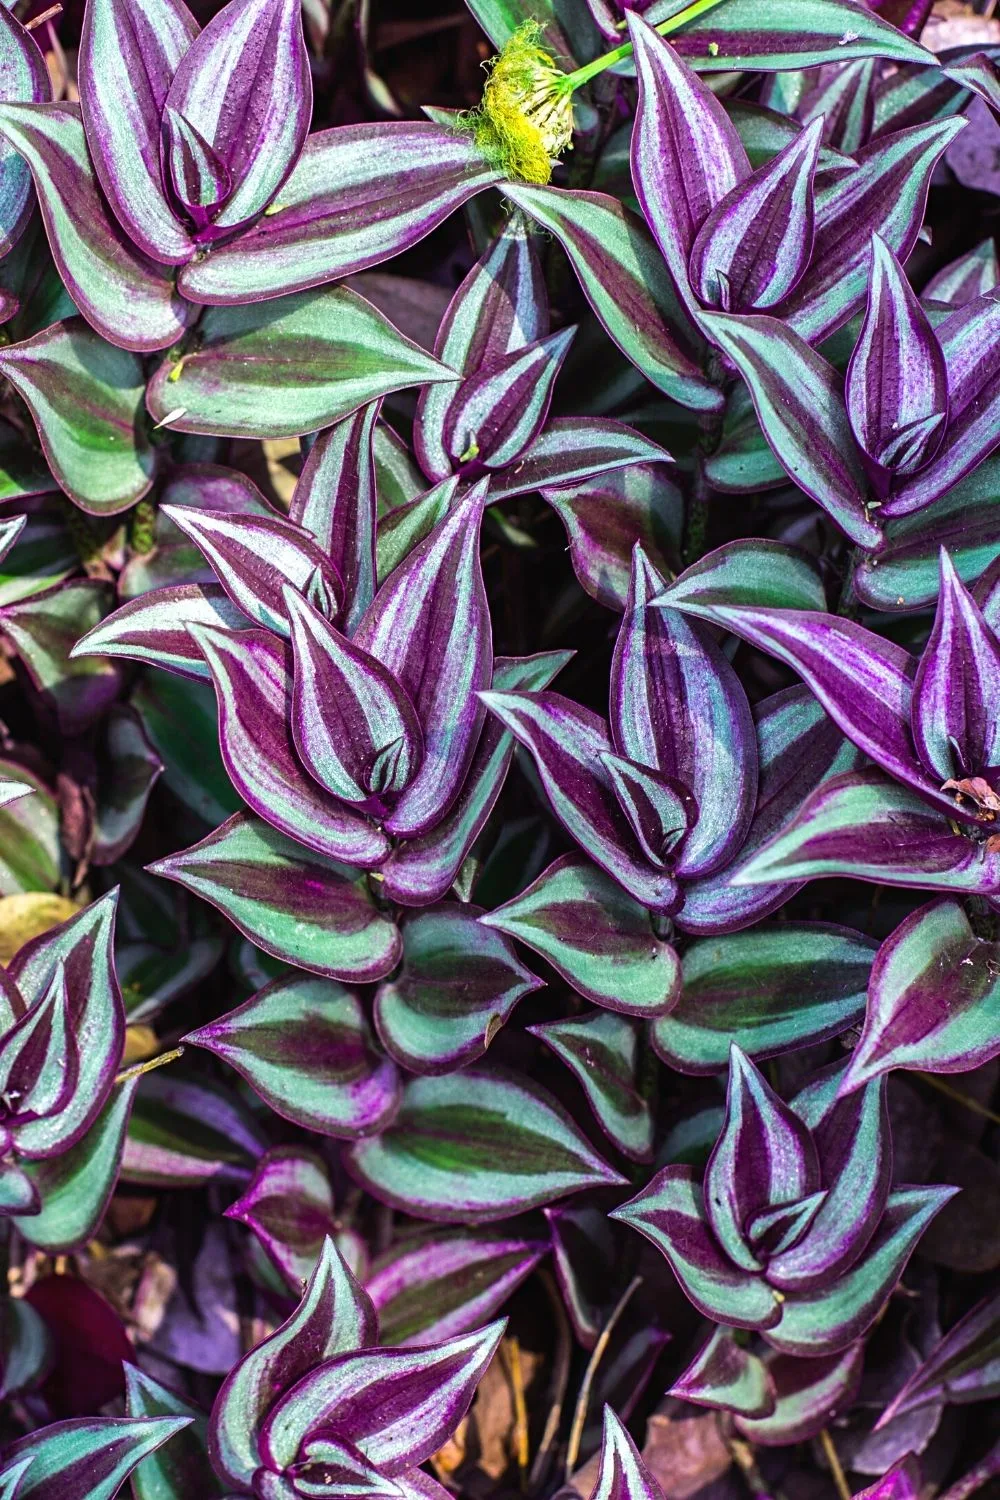 The leaves of the Wandering Jew (Tradescantia Zebrina) need to be pinched for it to look beautiful